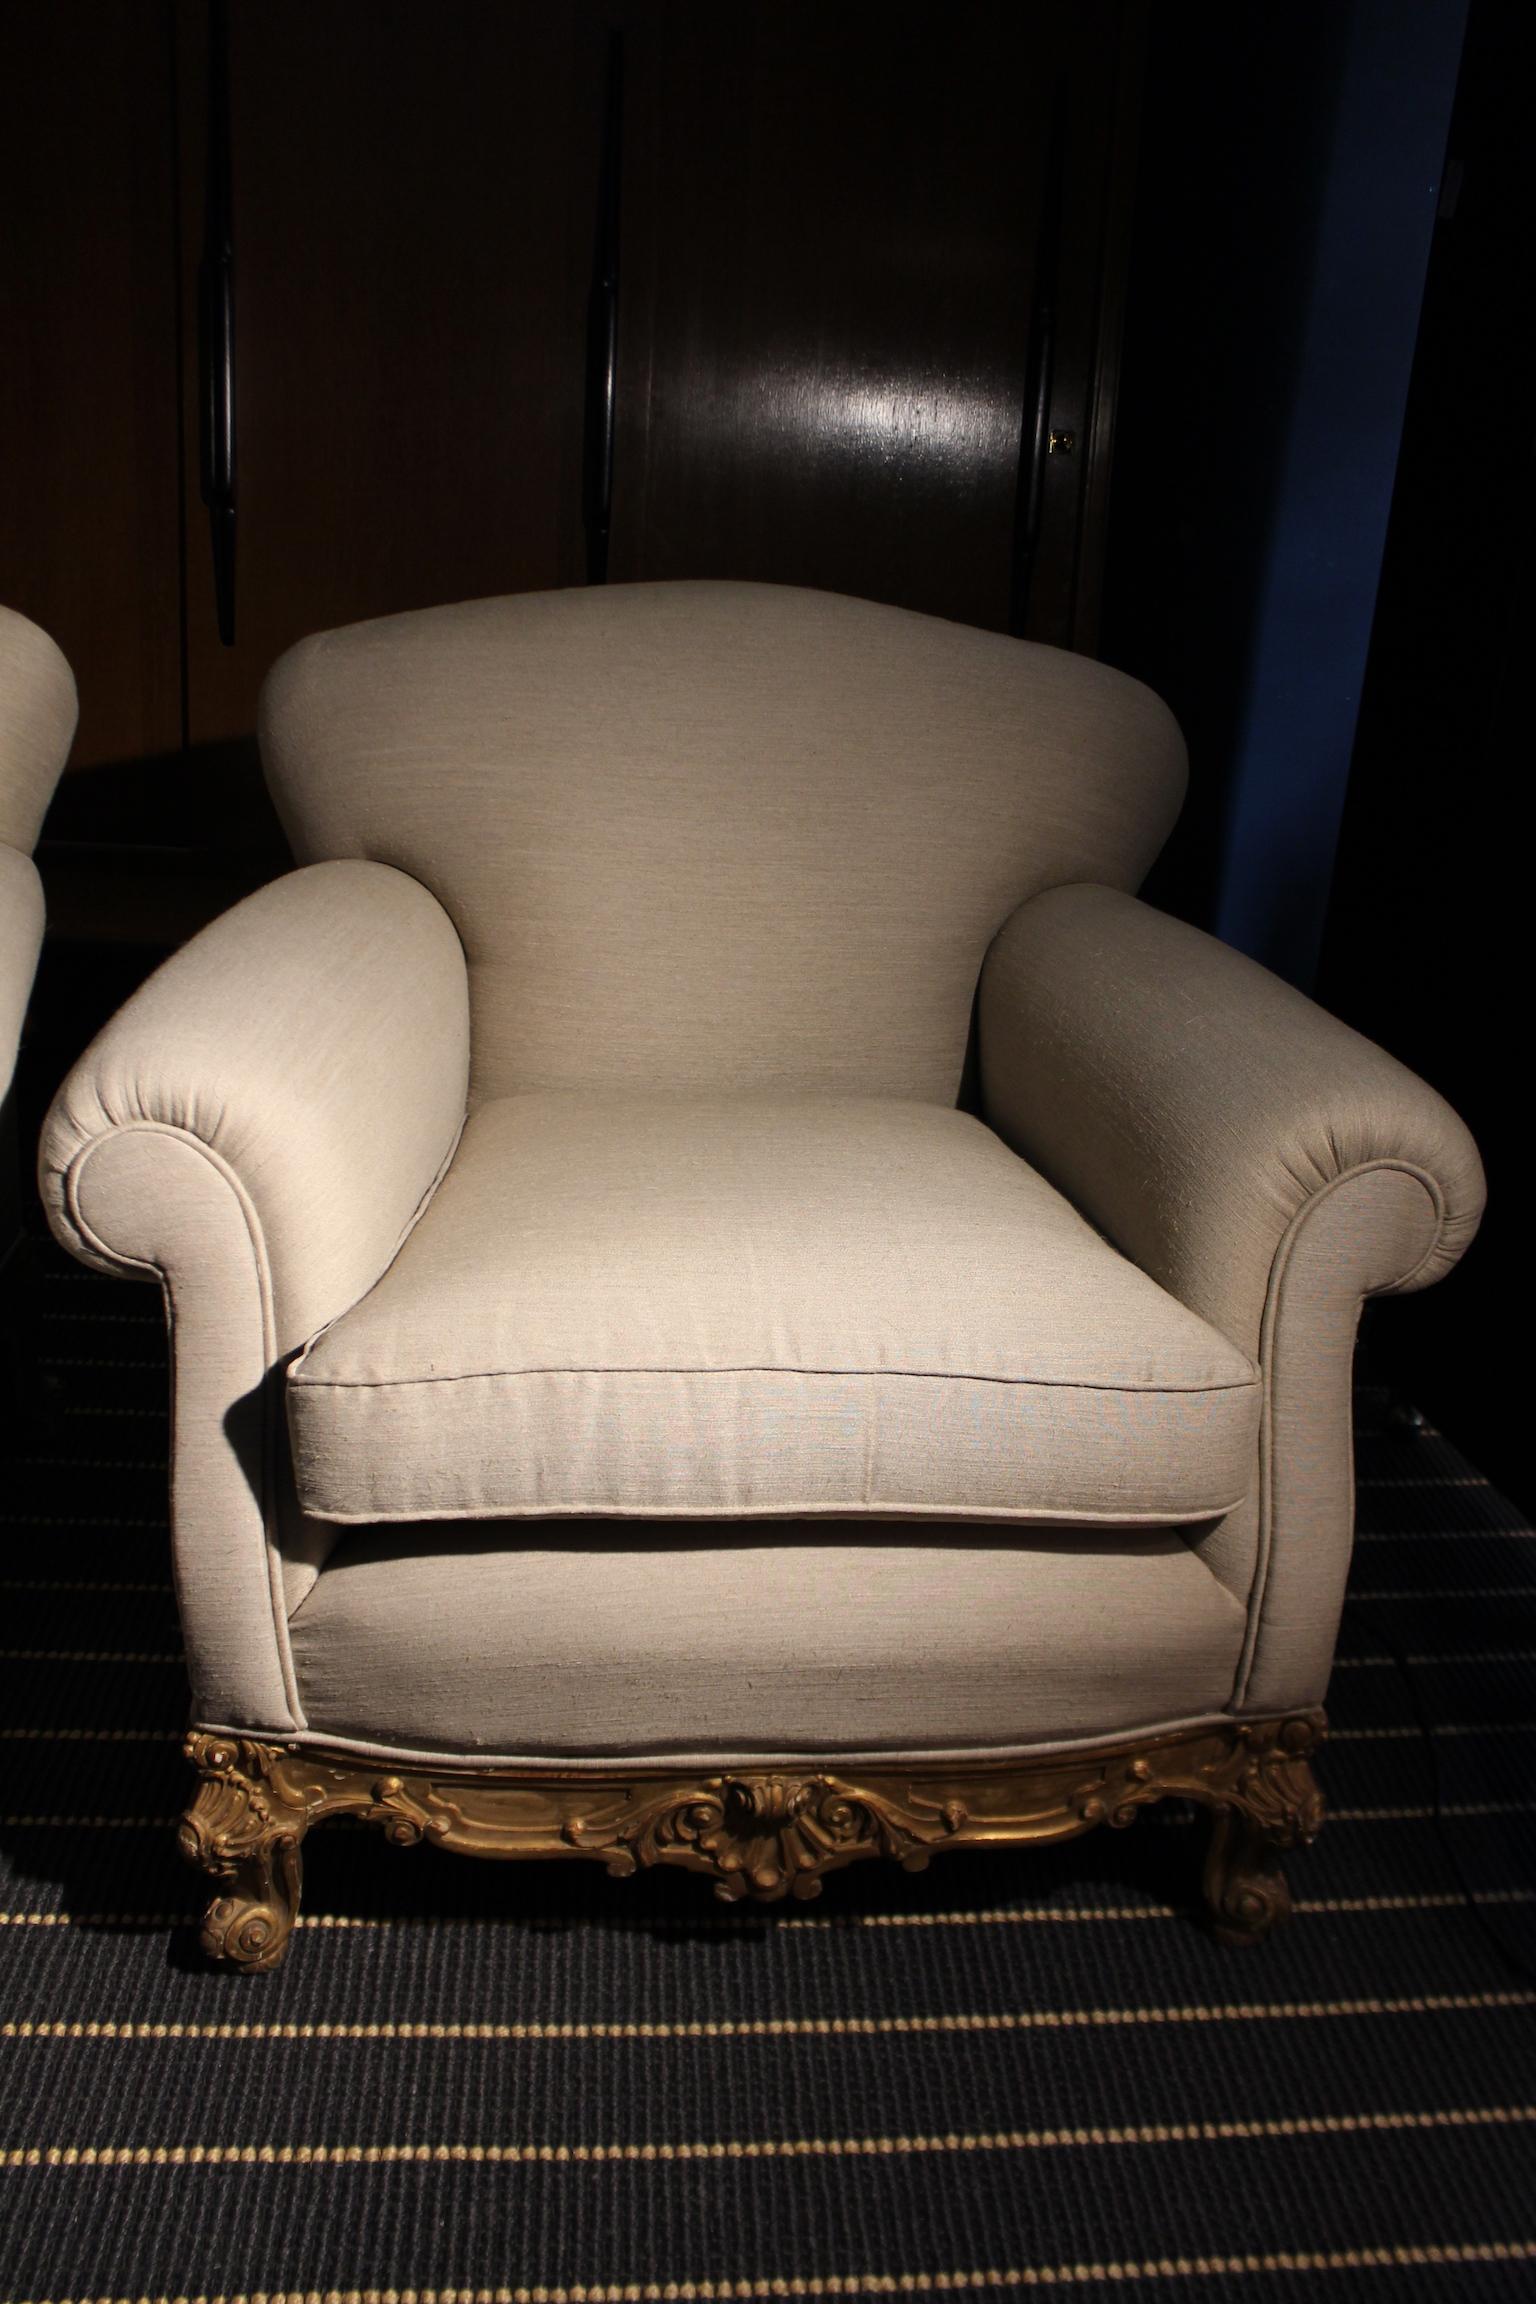 Italians midcentury pair of Baroque style armchairs 1950 covered in Ecru Linen fabric, internal padding in hypoallergenic material and the structure in golden walnut has had a conservative cestoration to preserve the charm of the past.